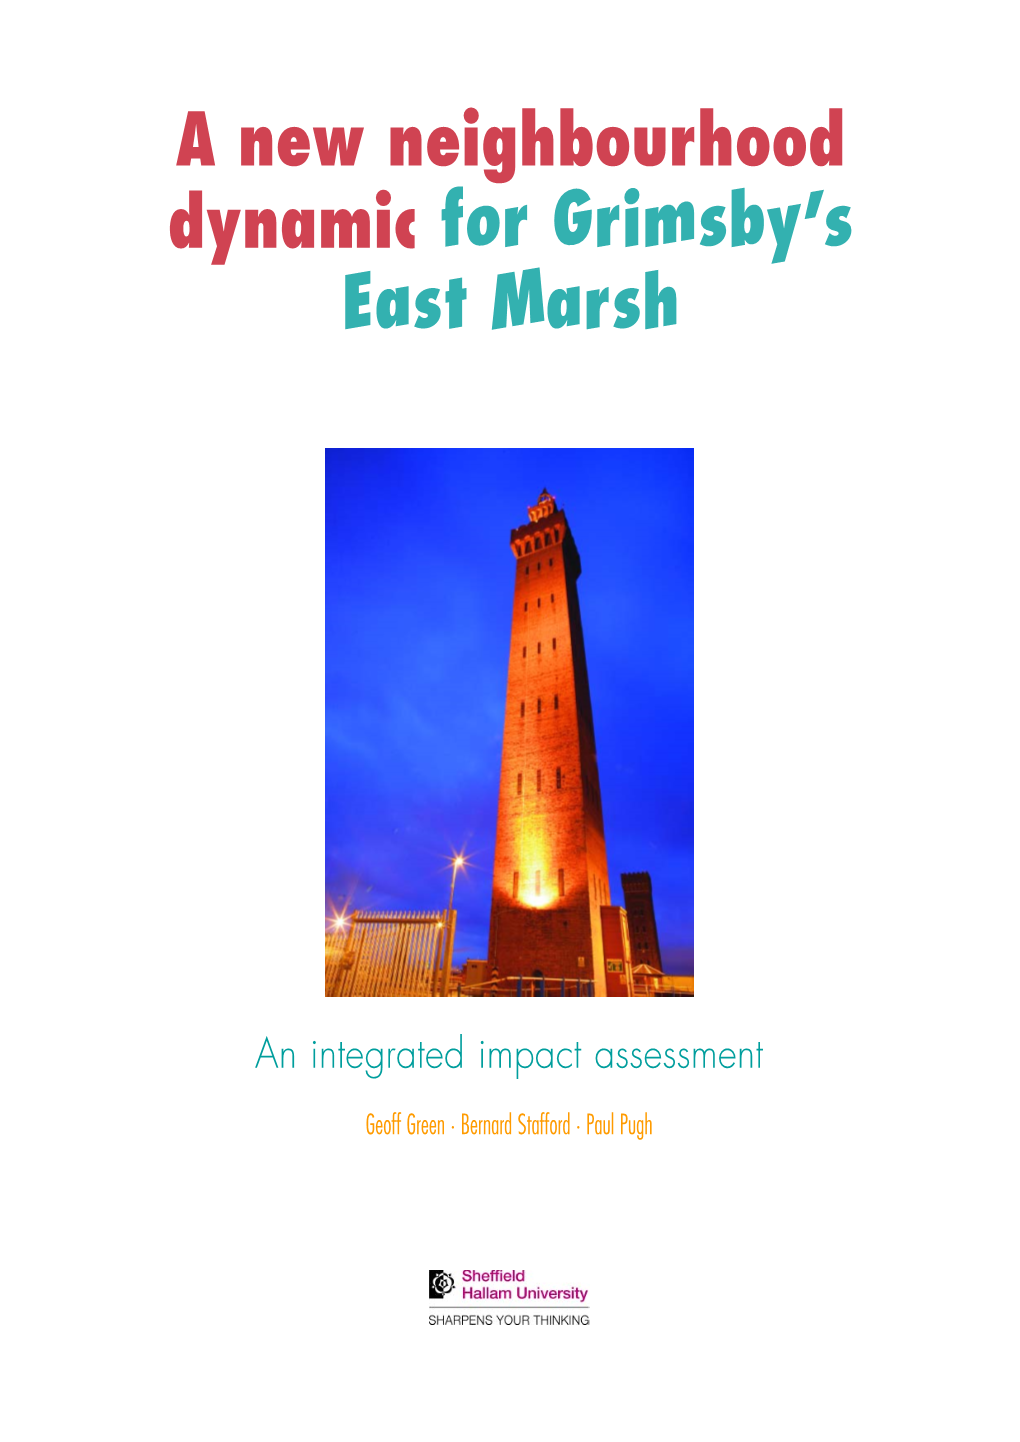 Grimsby's East Marsh Integrated Impact Assessment